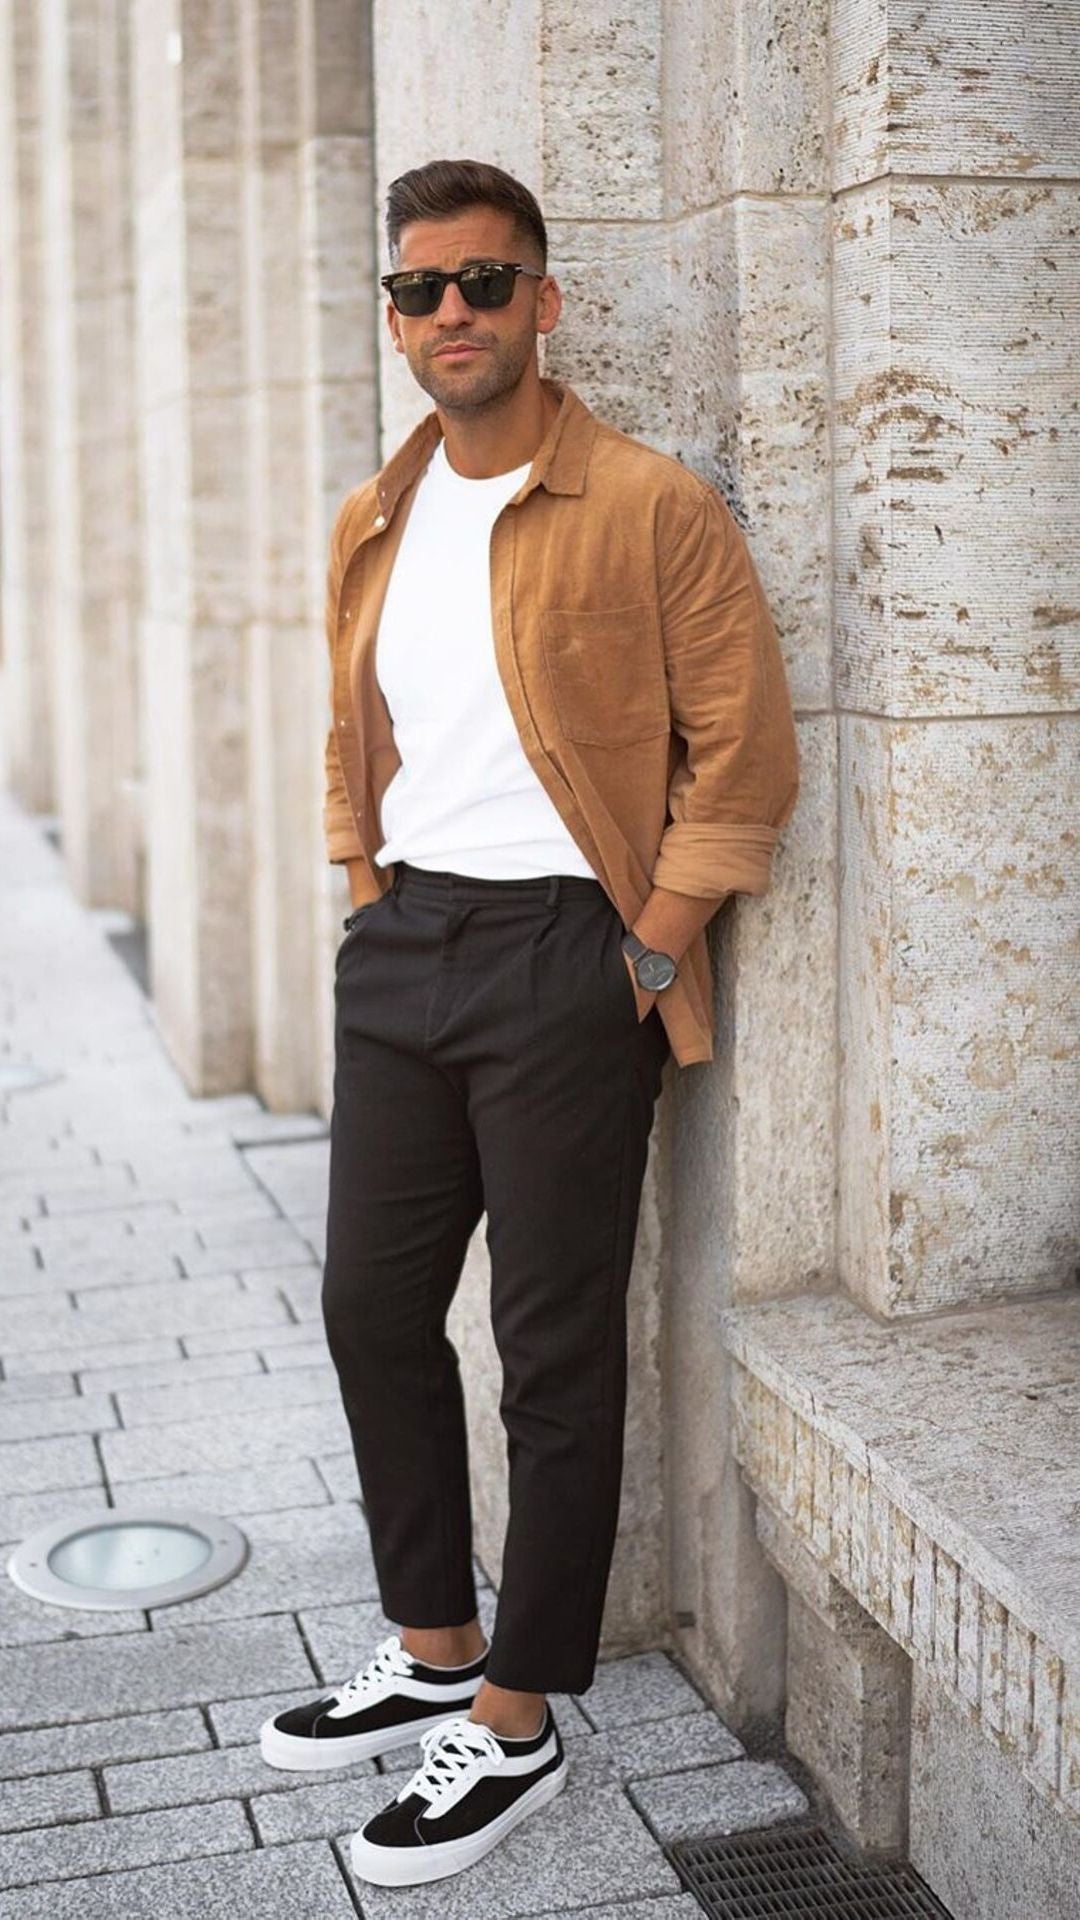 5 Casual Street Style Looks For Men #mens #fashion #street #style 